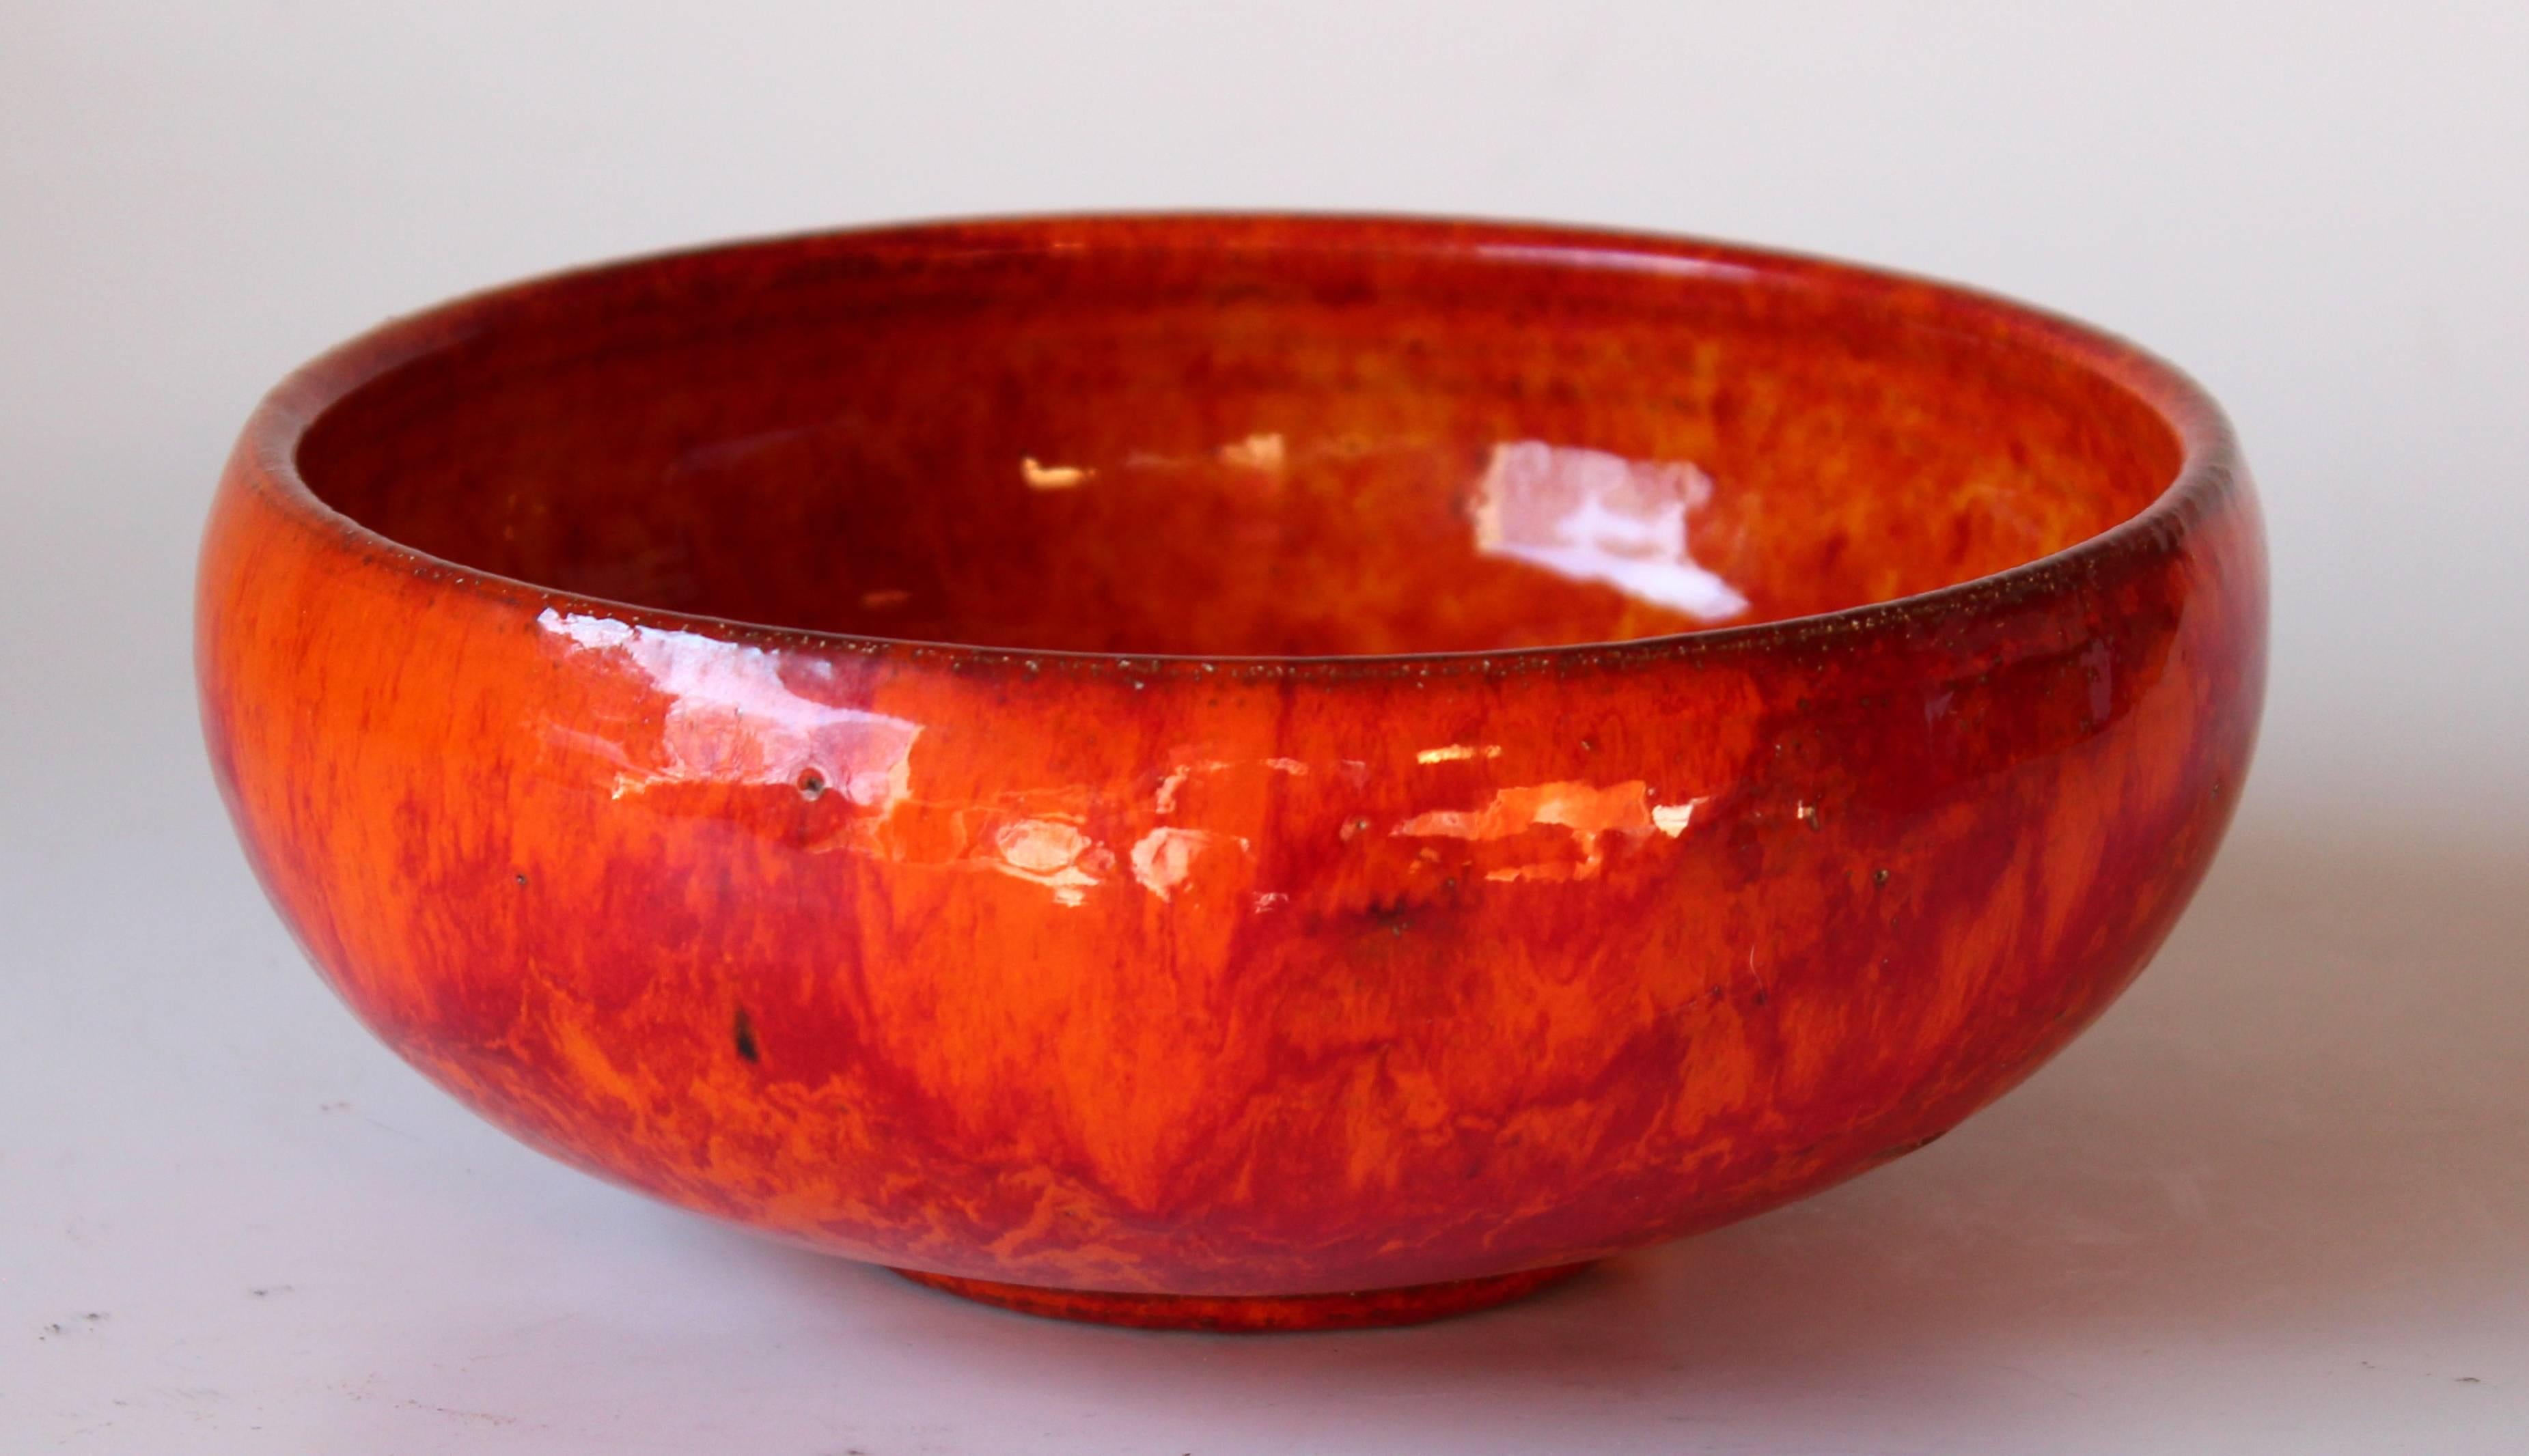 Vintage hand-turned Studio Pottery bowl by the prolific and beloved artist Paul Bellardo, circa 1970s. According to his website, Mr. Bellardo, who just died this past year at age 93, studied in Boston and had galleries in Provincetown and the West